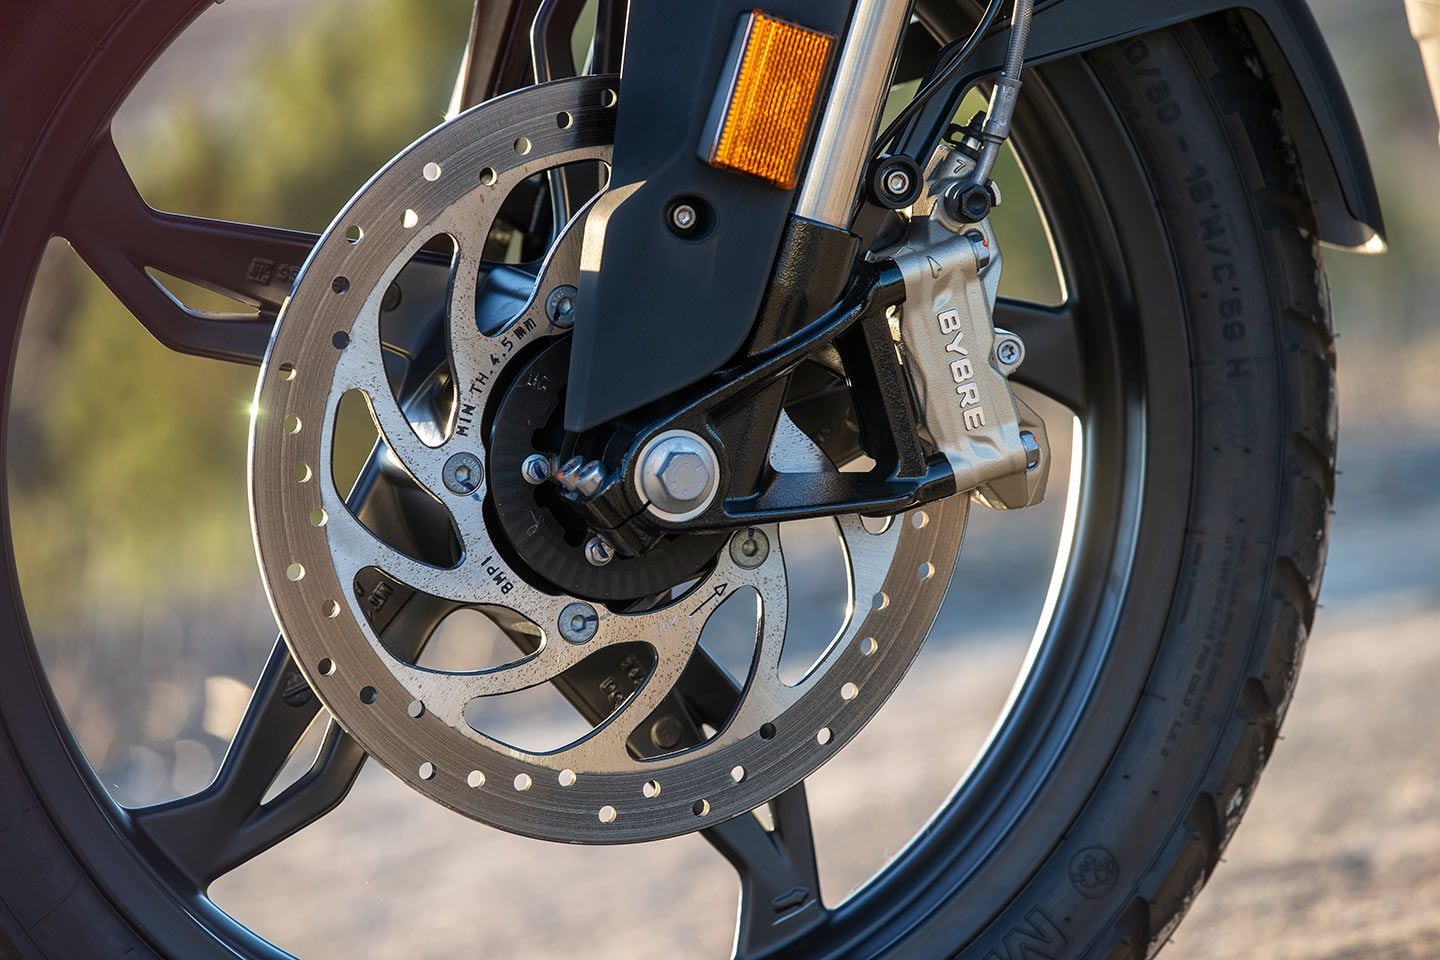 BMW fitted the G 310 GS with a four-piston ByBre caliper, resulting in ample stopping power from the 300mm disc.